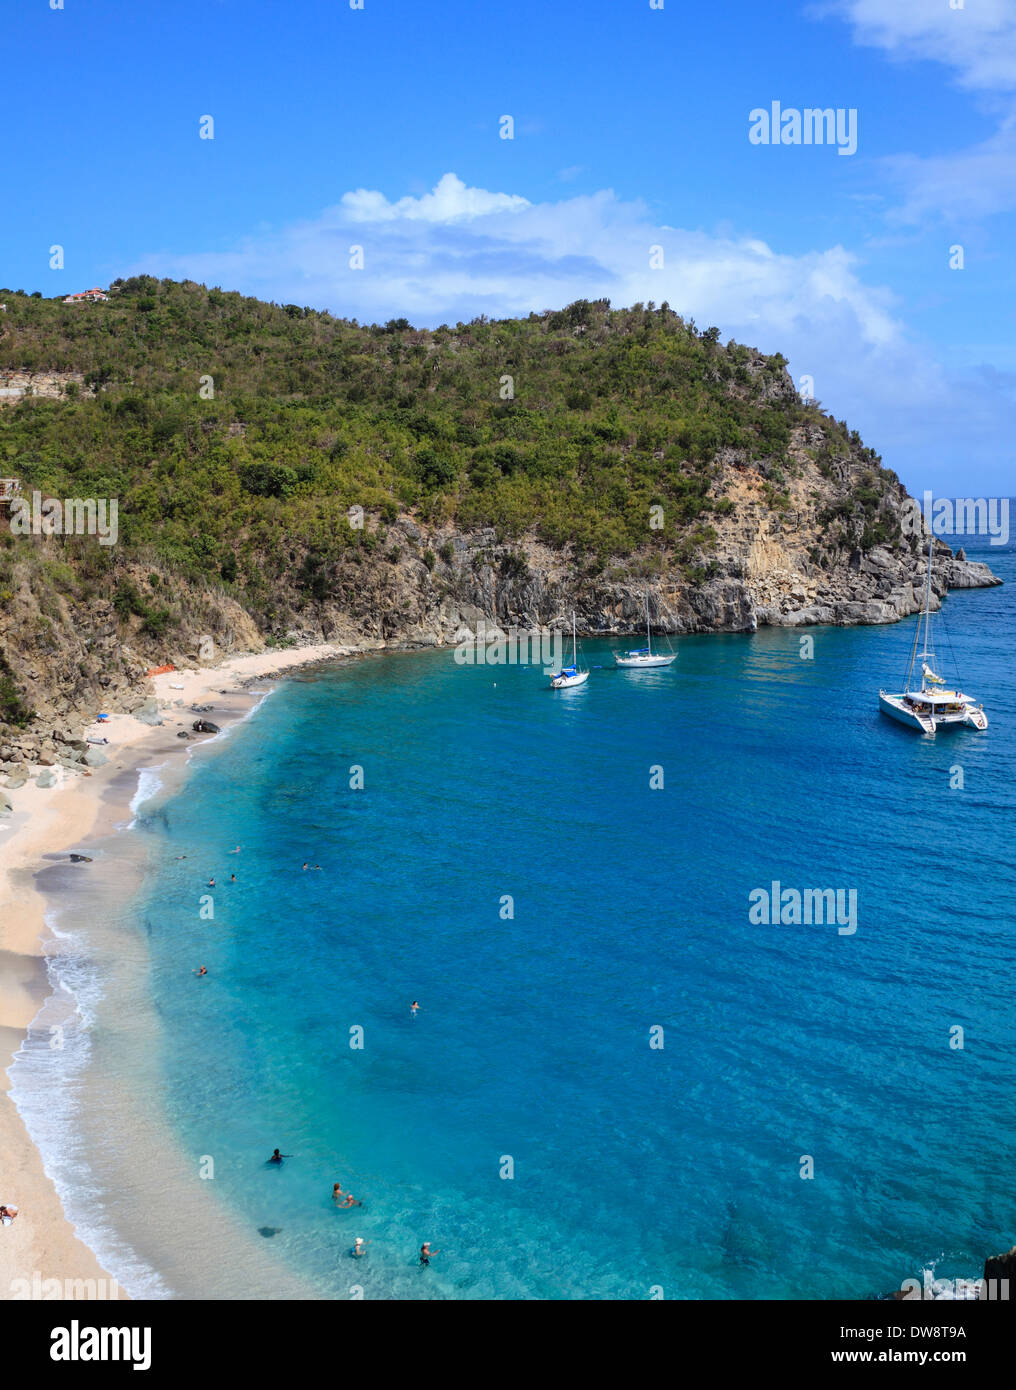 Beaches of St. Barts in the West Indies Stock Photo - Image of beach,  indies: 112043212